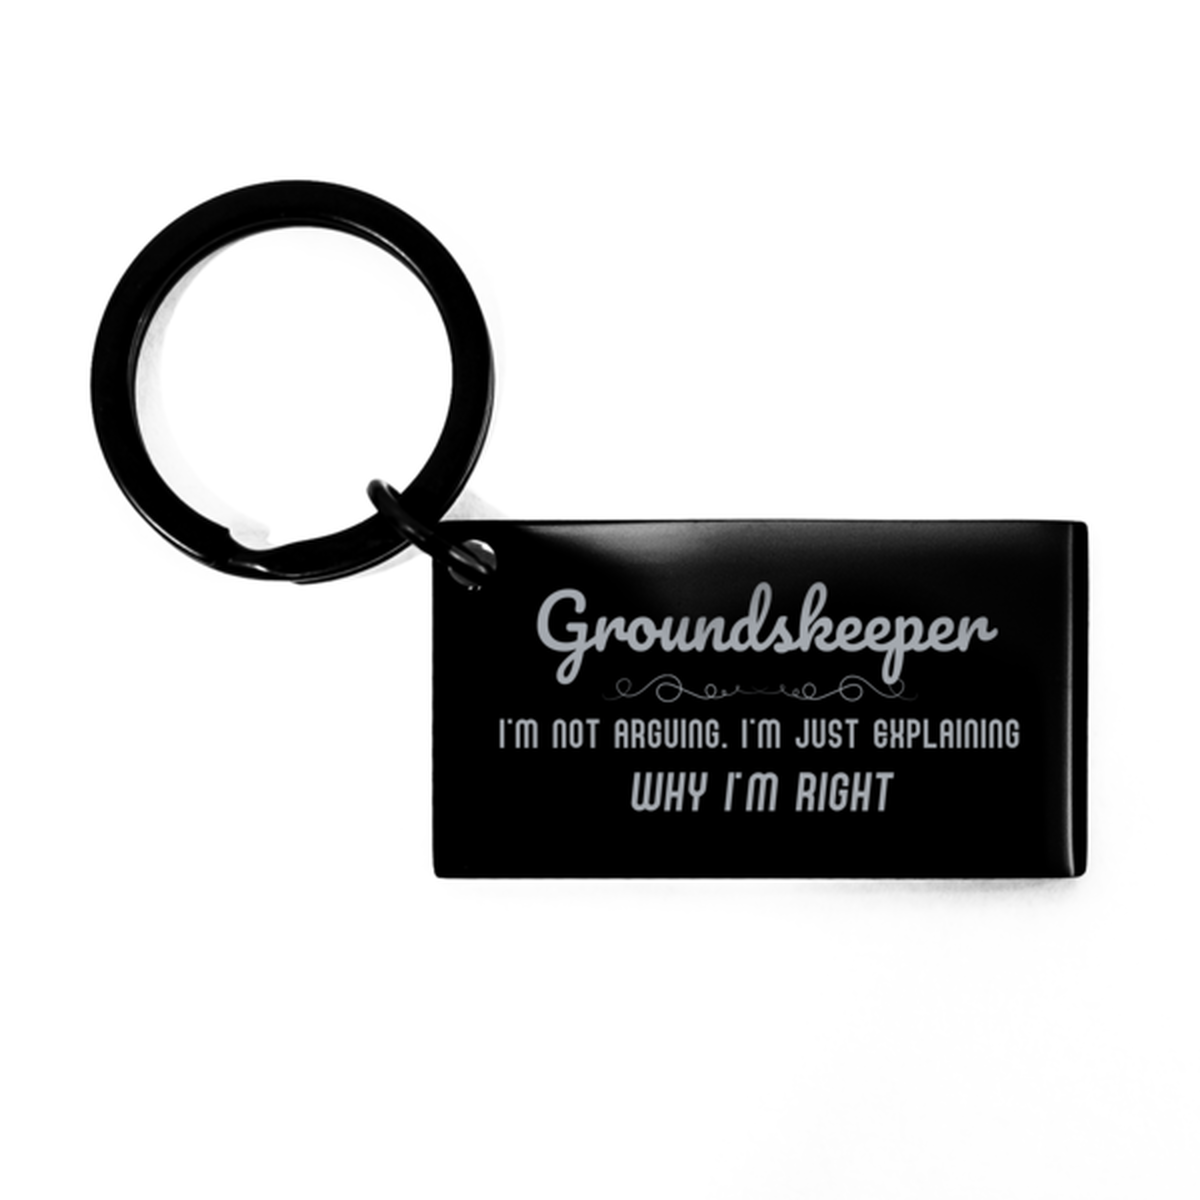 Groundskeeper I'm not Arguing. I'm Just Explaining Why I'm RIGHT Keychain, Funny Saying Quote Groundskeeper Gifts For Groundskeeper Graduation Birthday Christmas Gifts for Men Women Coworker